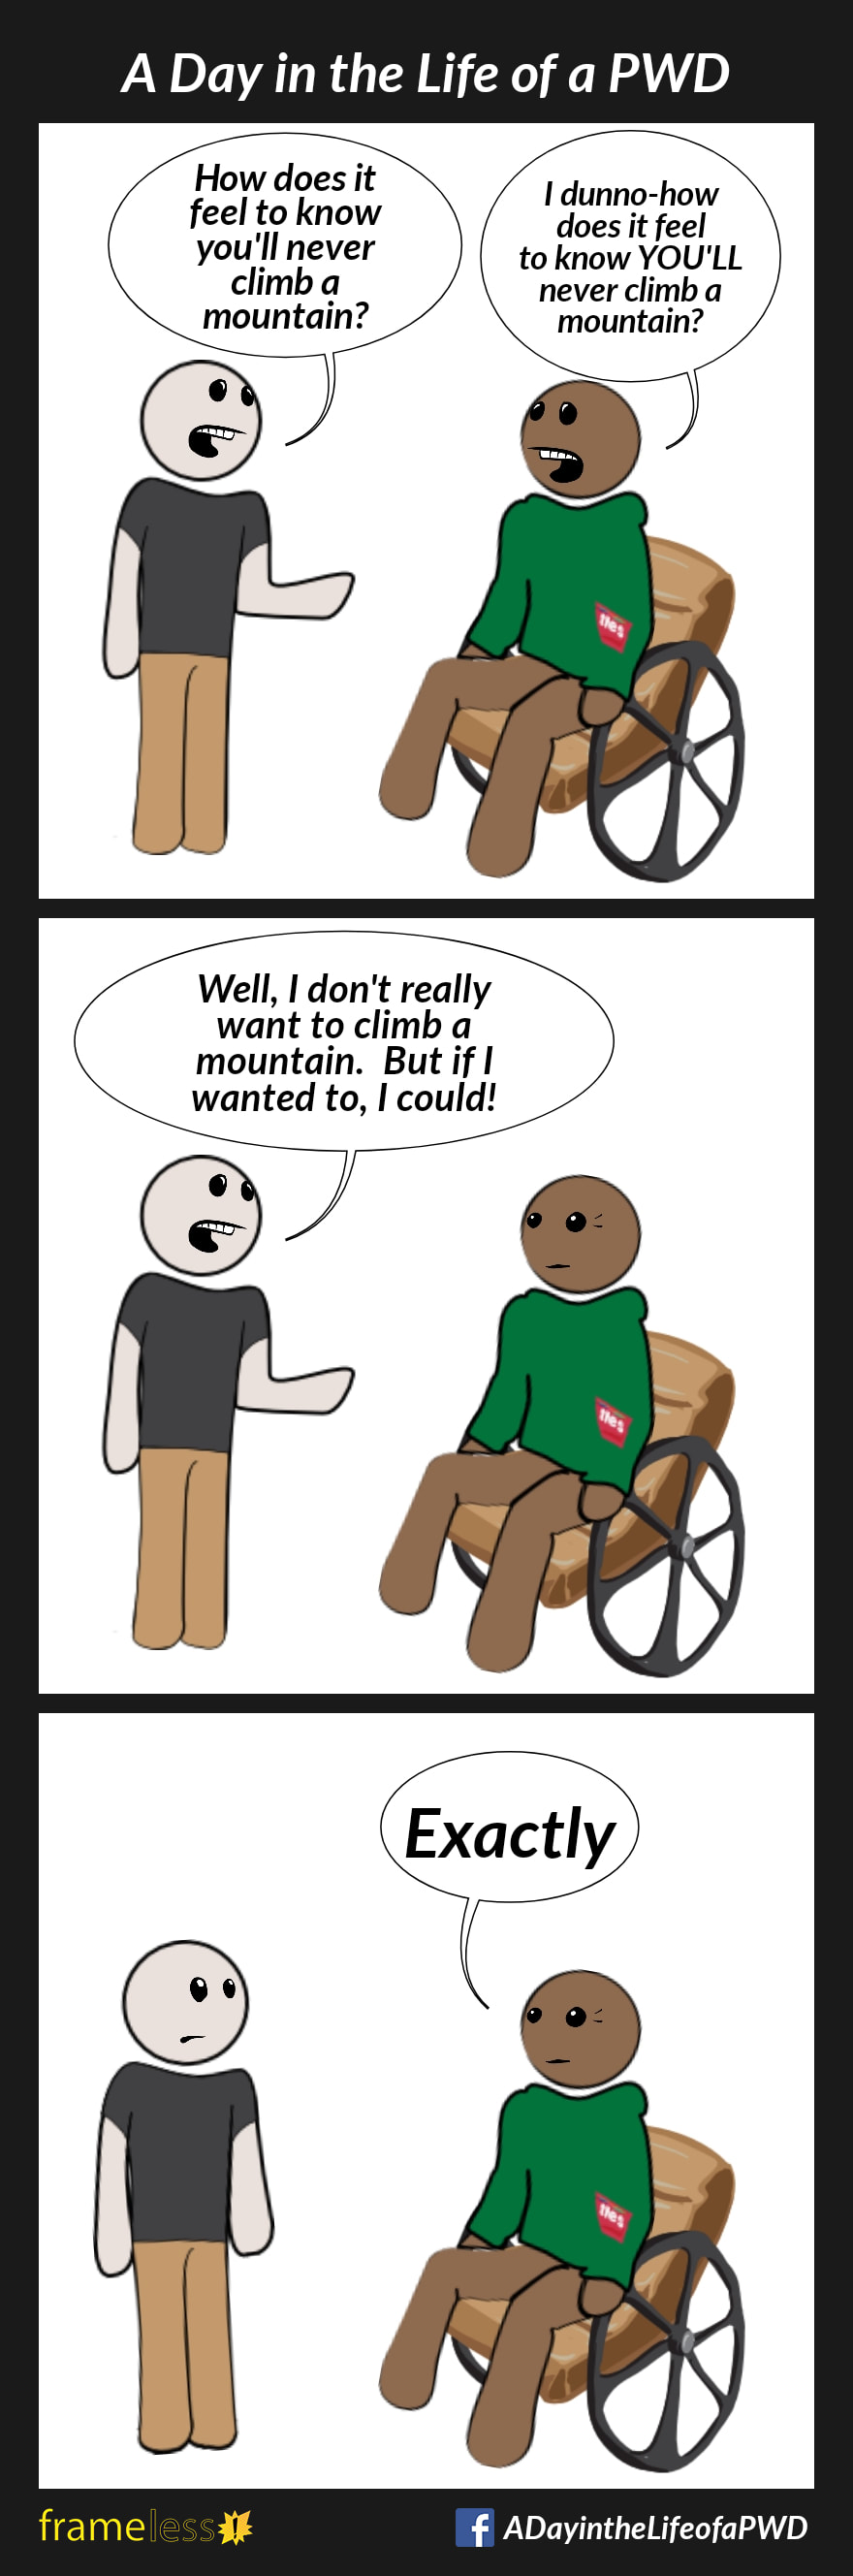 COMIC STRIP 
A Day in the Life of a PWD (Person With a Disability) 

Frame 1:
A wheelchair user is talking to another man.
MAN: How does it feel to know you'll never climb a mountain?
WHEELCHAIR USER: I dunno- how does it feel to know YOU'LL never climb a mountain?

Frame 2:
MAN: Well, I don't really want to climb a mountain. But if I wanted to, I could!

Frame 3:
WHEELCHAIR USER: Exactly